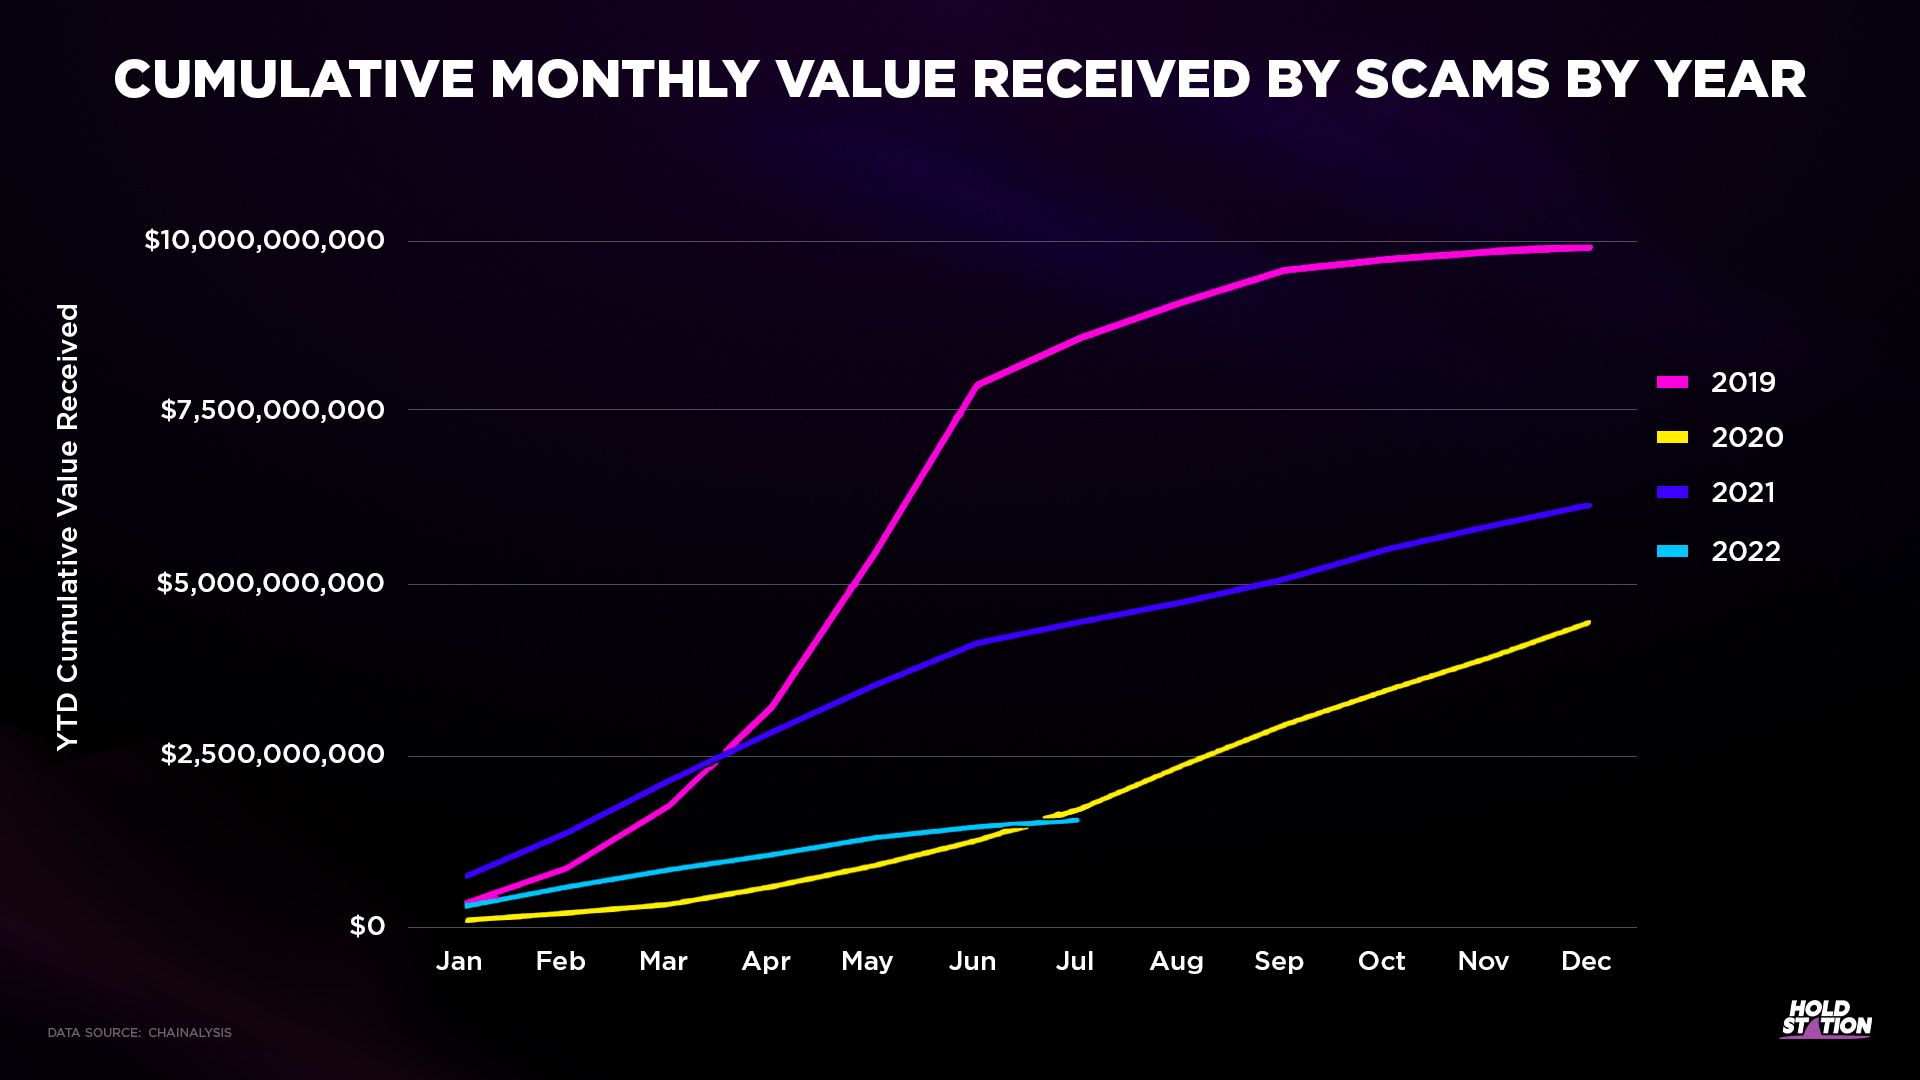 Cumulative monthly value received by scams from 2019 to 2022